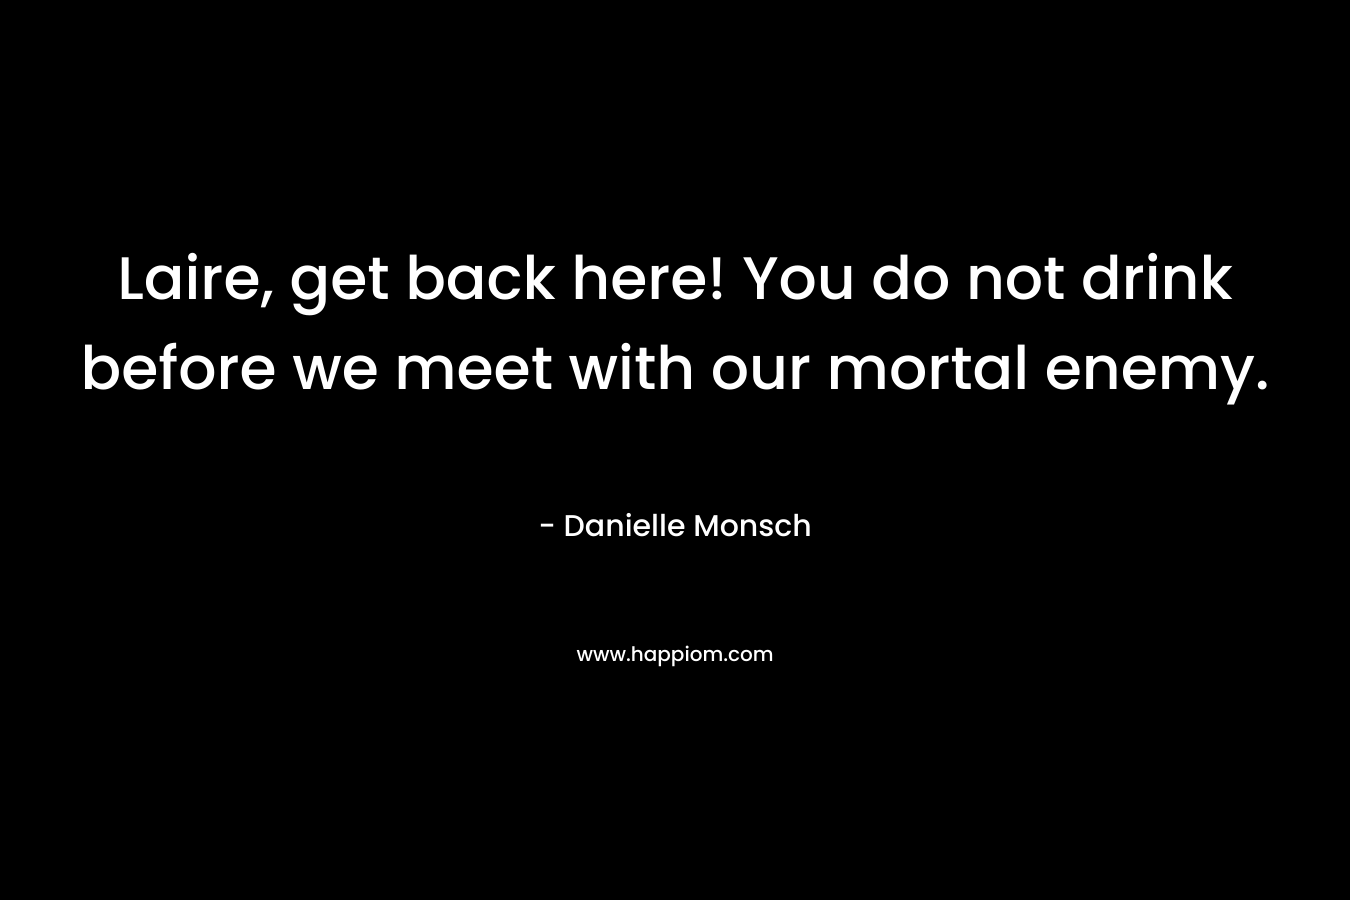 Laire, get back here! You do not drink before we meet with our mortal enemy. – Danielle Monsch